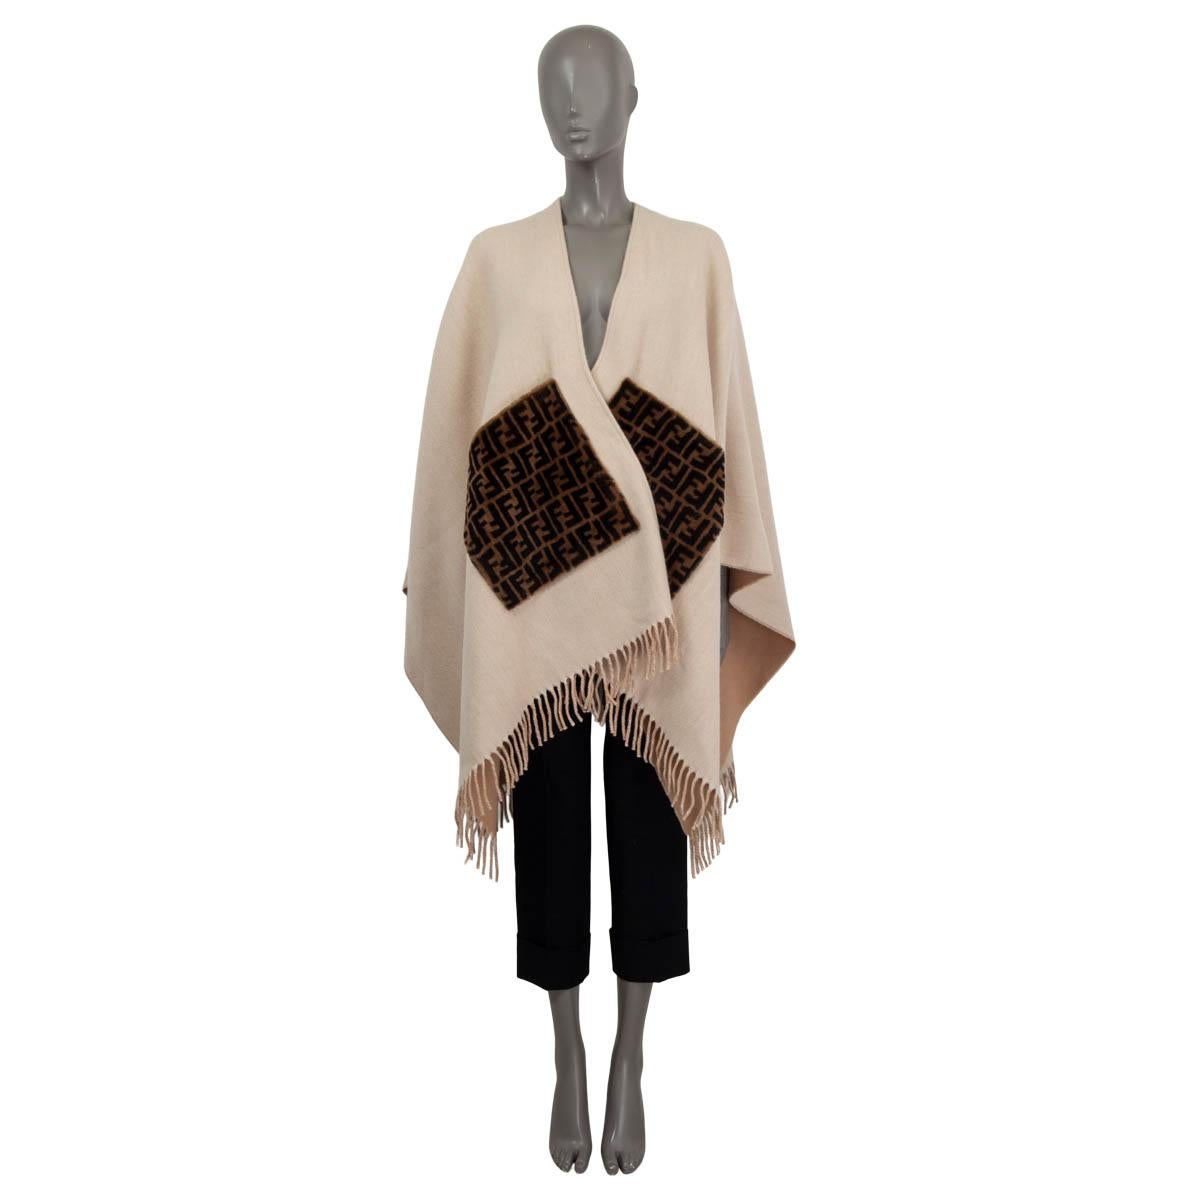 100% authentic Fendi 2022 fringed cape in beige cashmere (assumed because tag is missing). Features two logo shearlling patch pockets on the front. Unlined. Has been worn once and is in virtually new condition.

Measurements
Tag Size	One